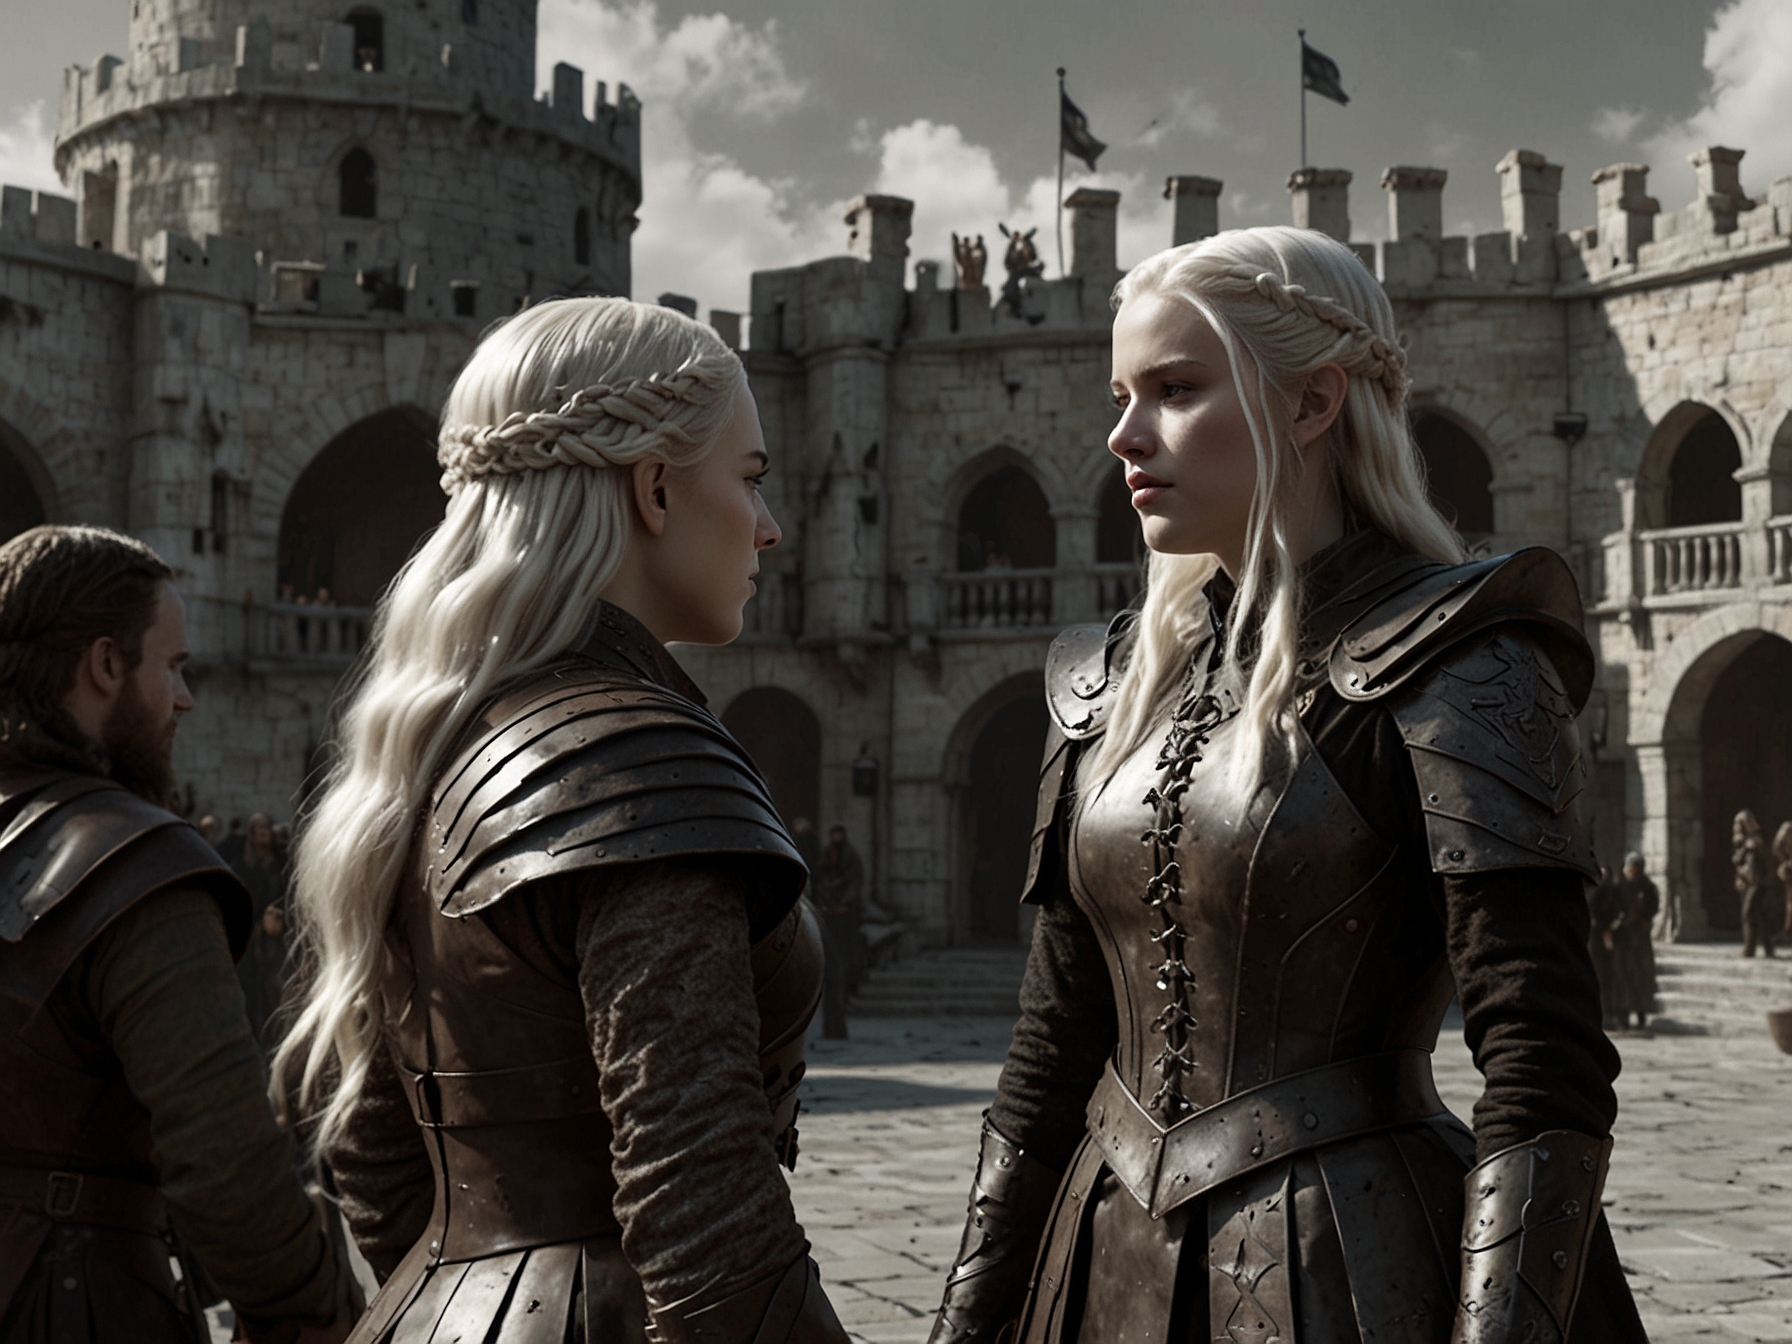 A tense encounter between Rhaenyra Targaryen and Alicent Hightower, surrounded by the grand architecture of King’s Landing, showcasing their complicated relationship and political stakes.